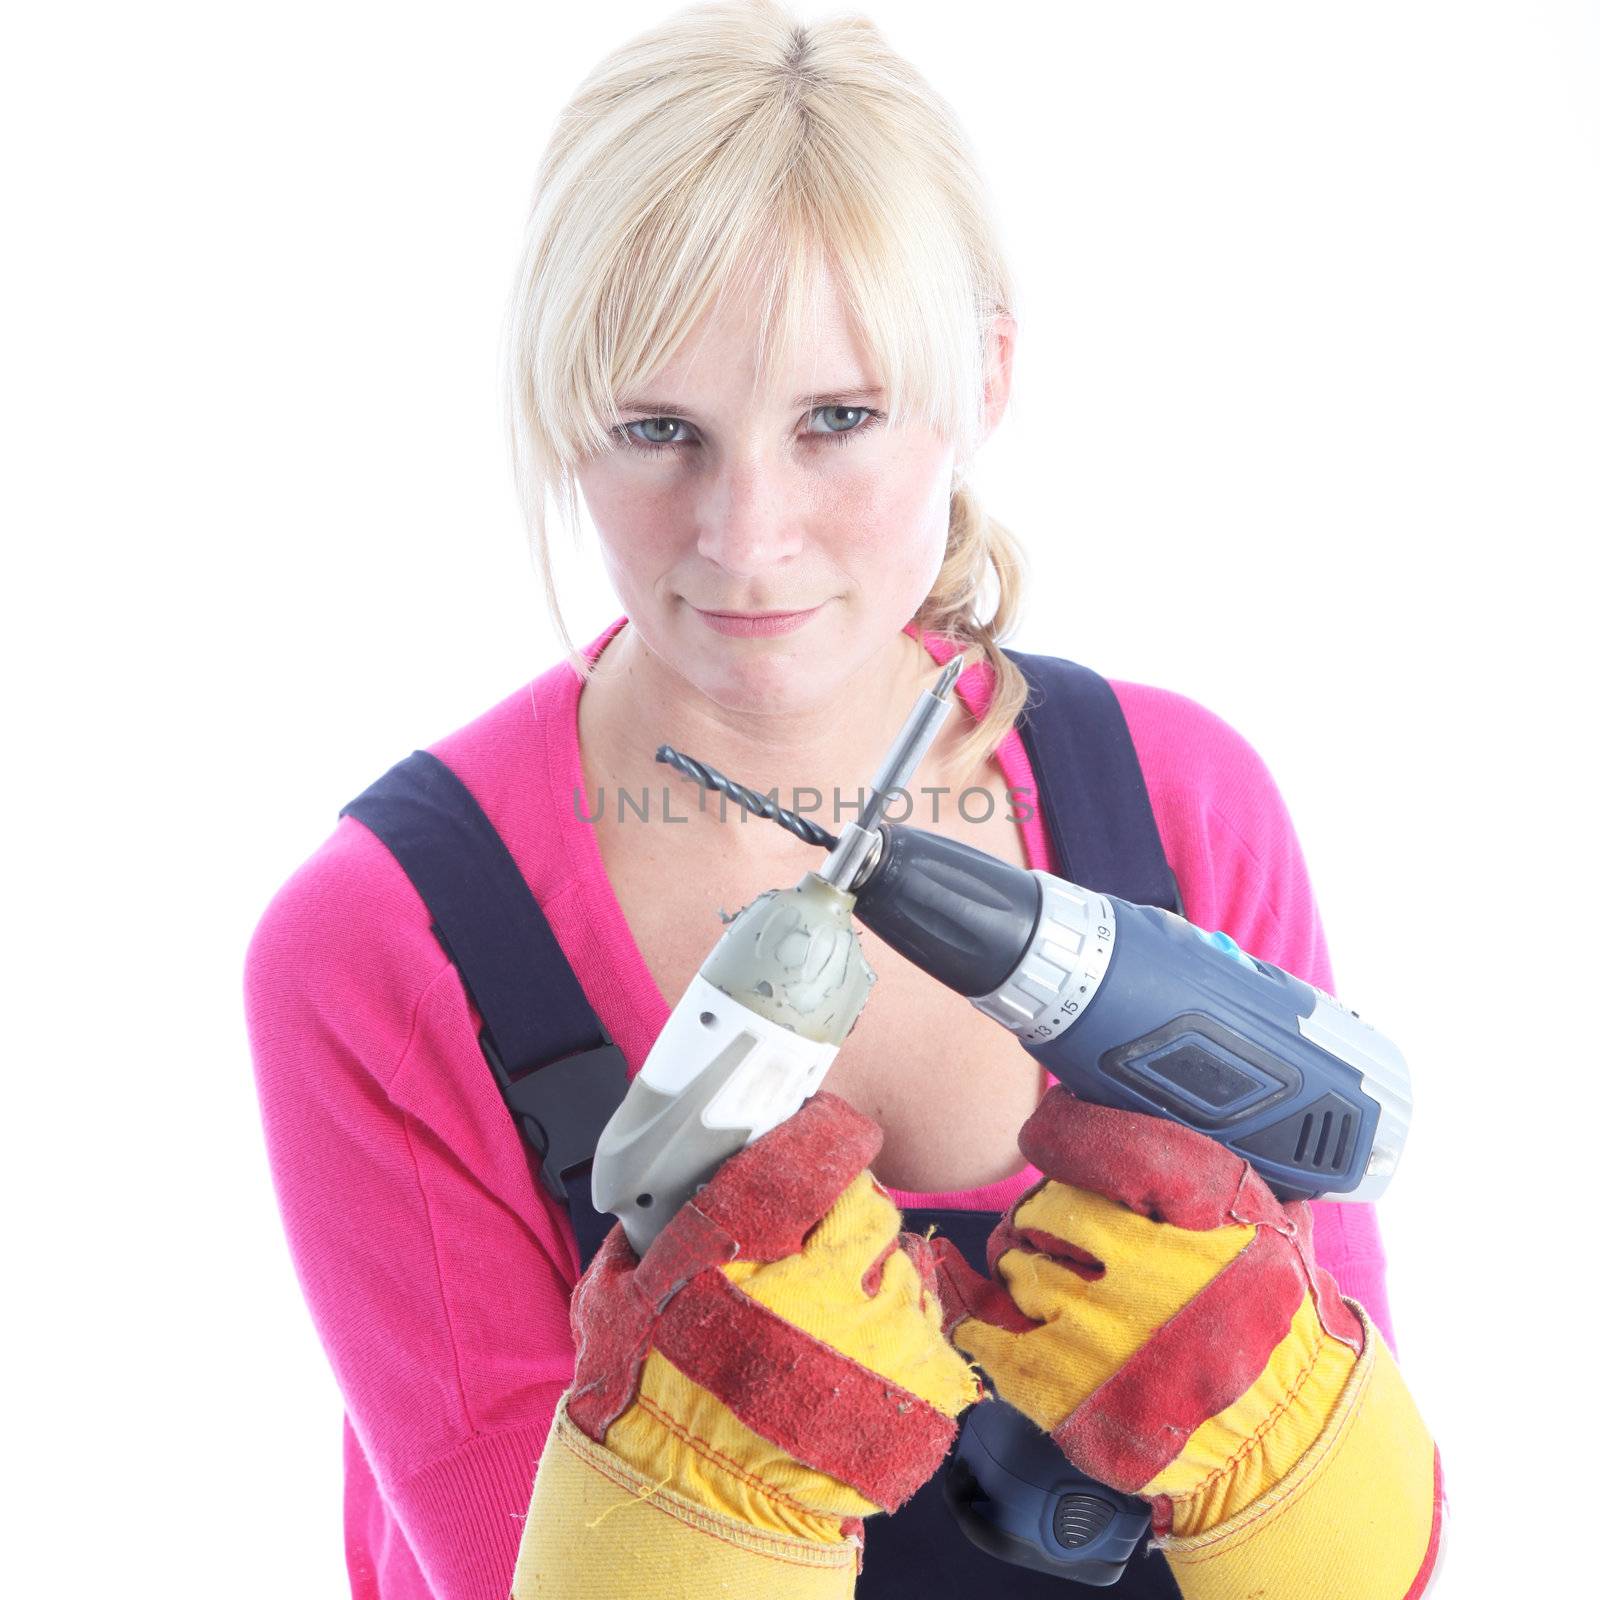 Woman DIY in dungarees and protective gloves holding a screwdriver and portable drill in front of her with a determined expression Woman DIY in dungarees and protective gloves holding a screwdriver and portable drill in front og her with a determined expression 